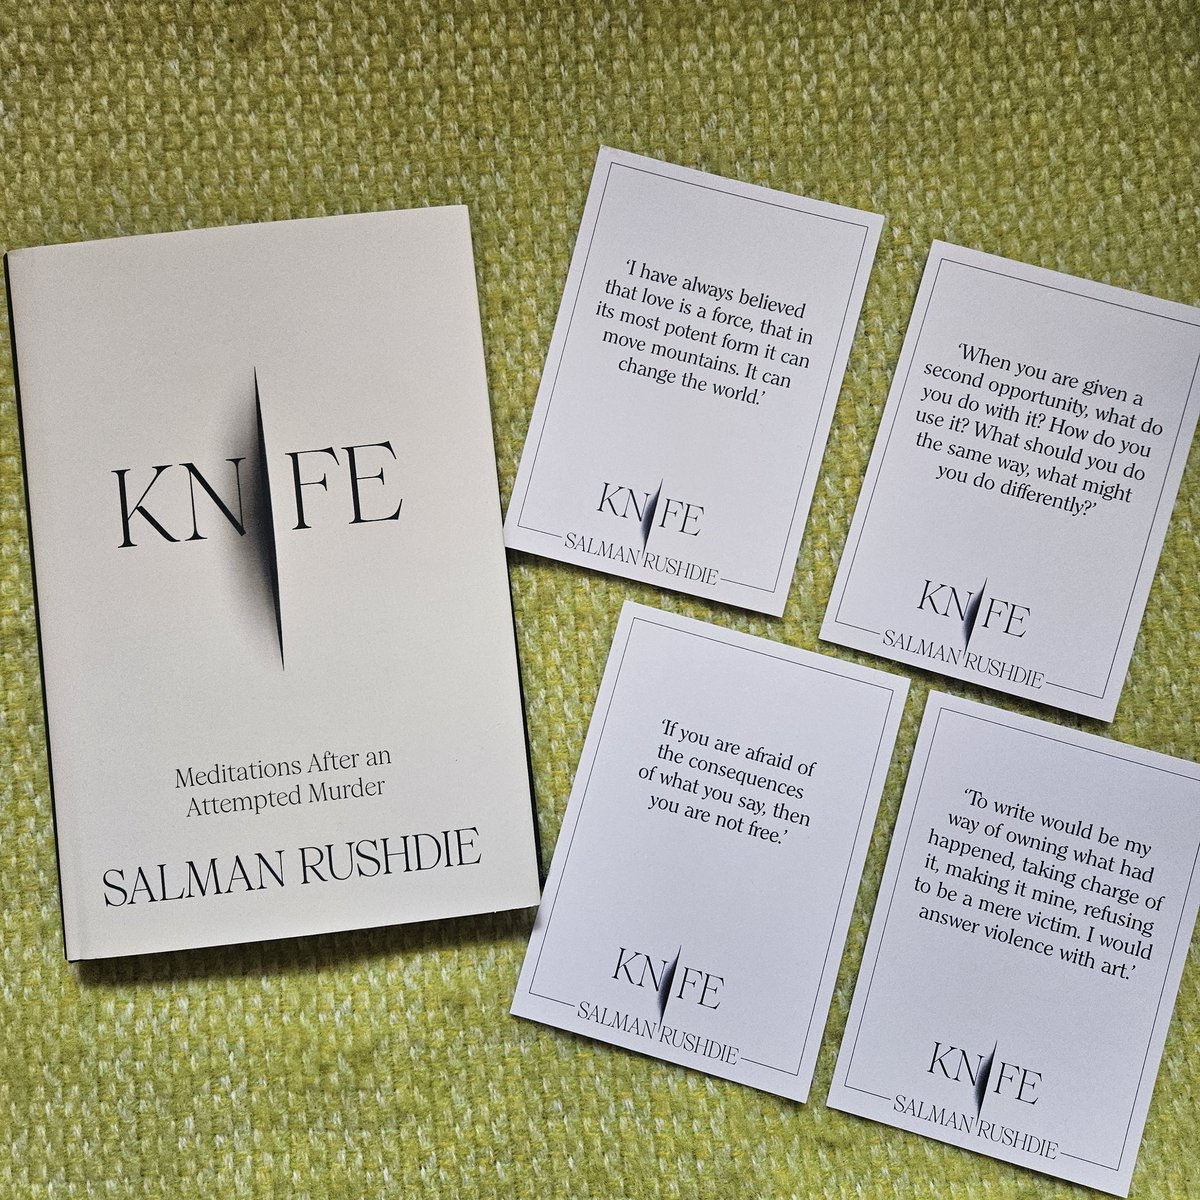 Hugely grateful to @vintagebooks for sending me a copy of Knife by Salman Rushdie It's sure to be a compelling meditation on a truly life changing event Out now